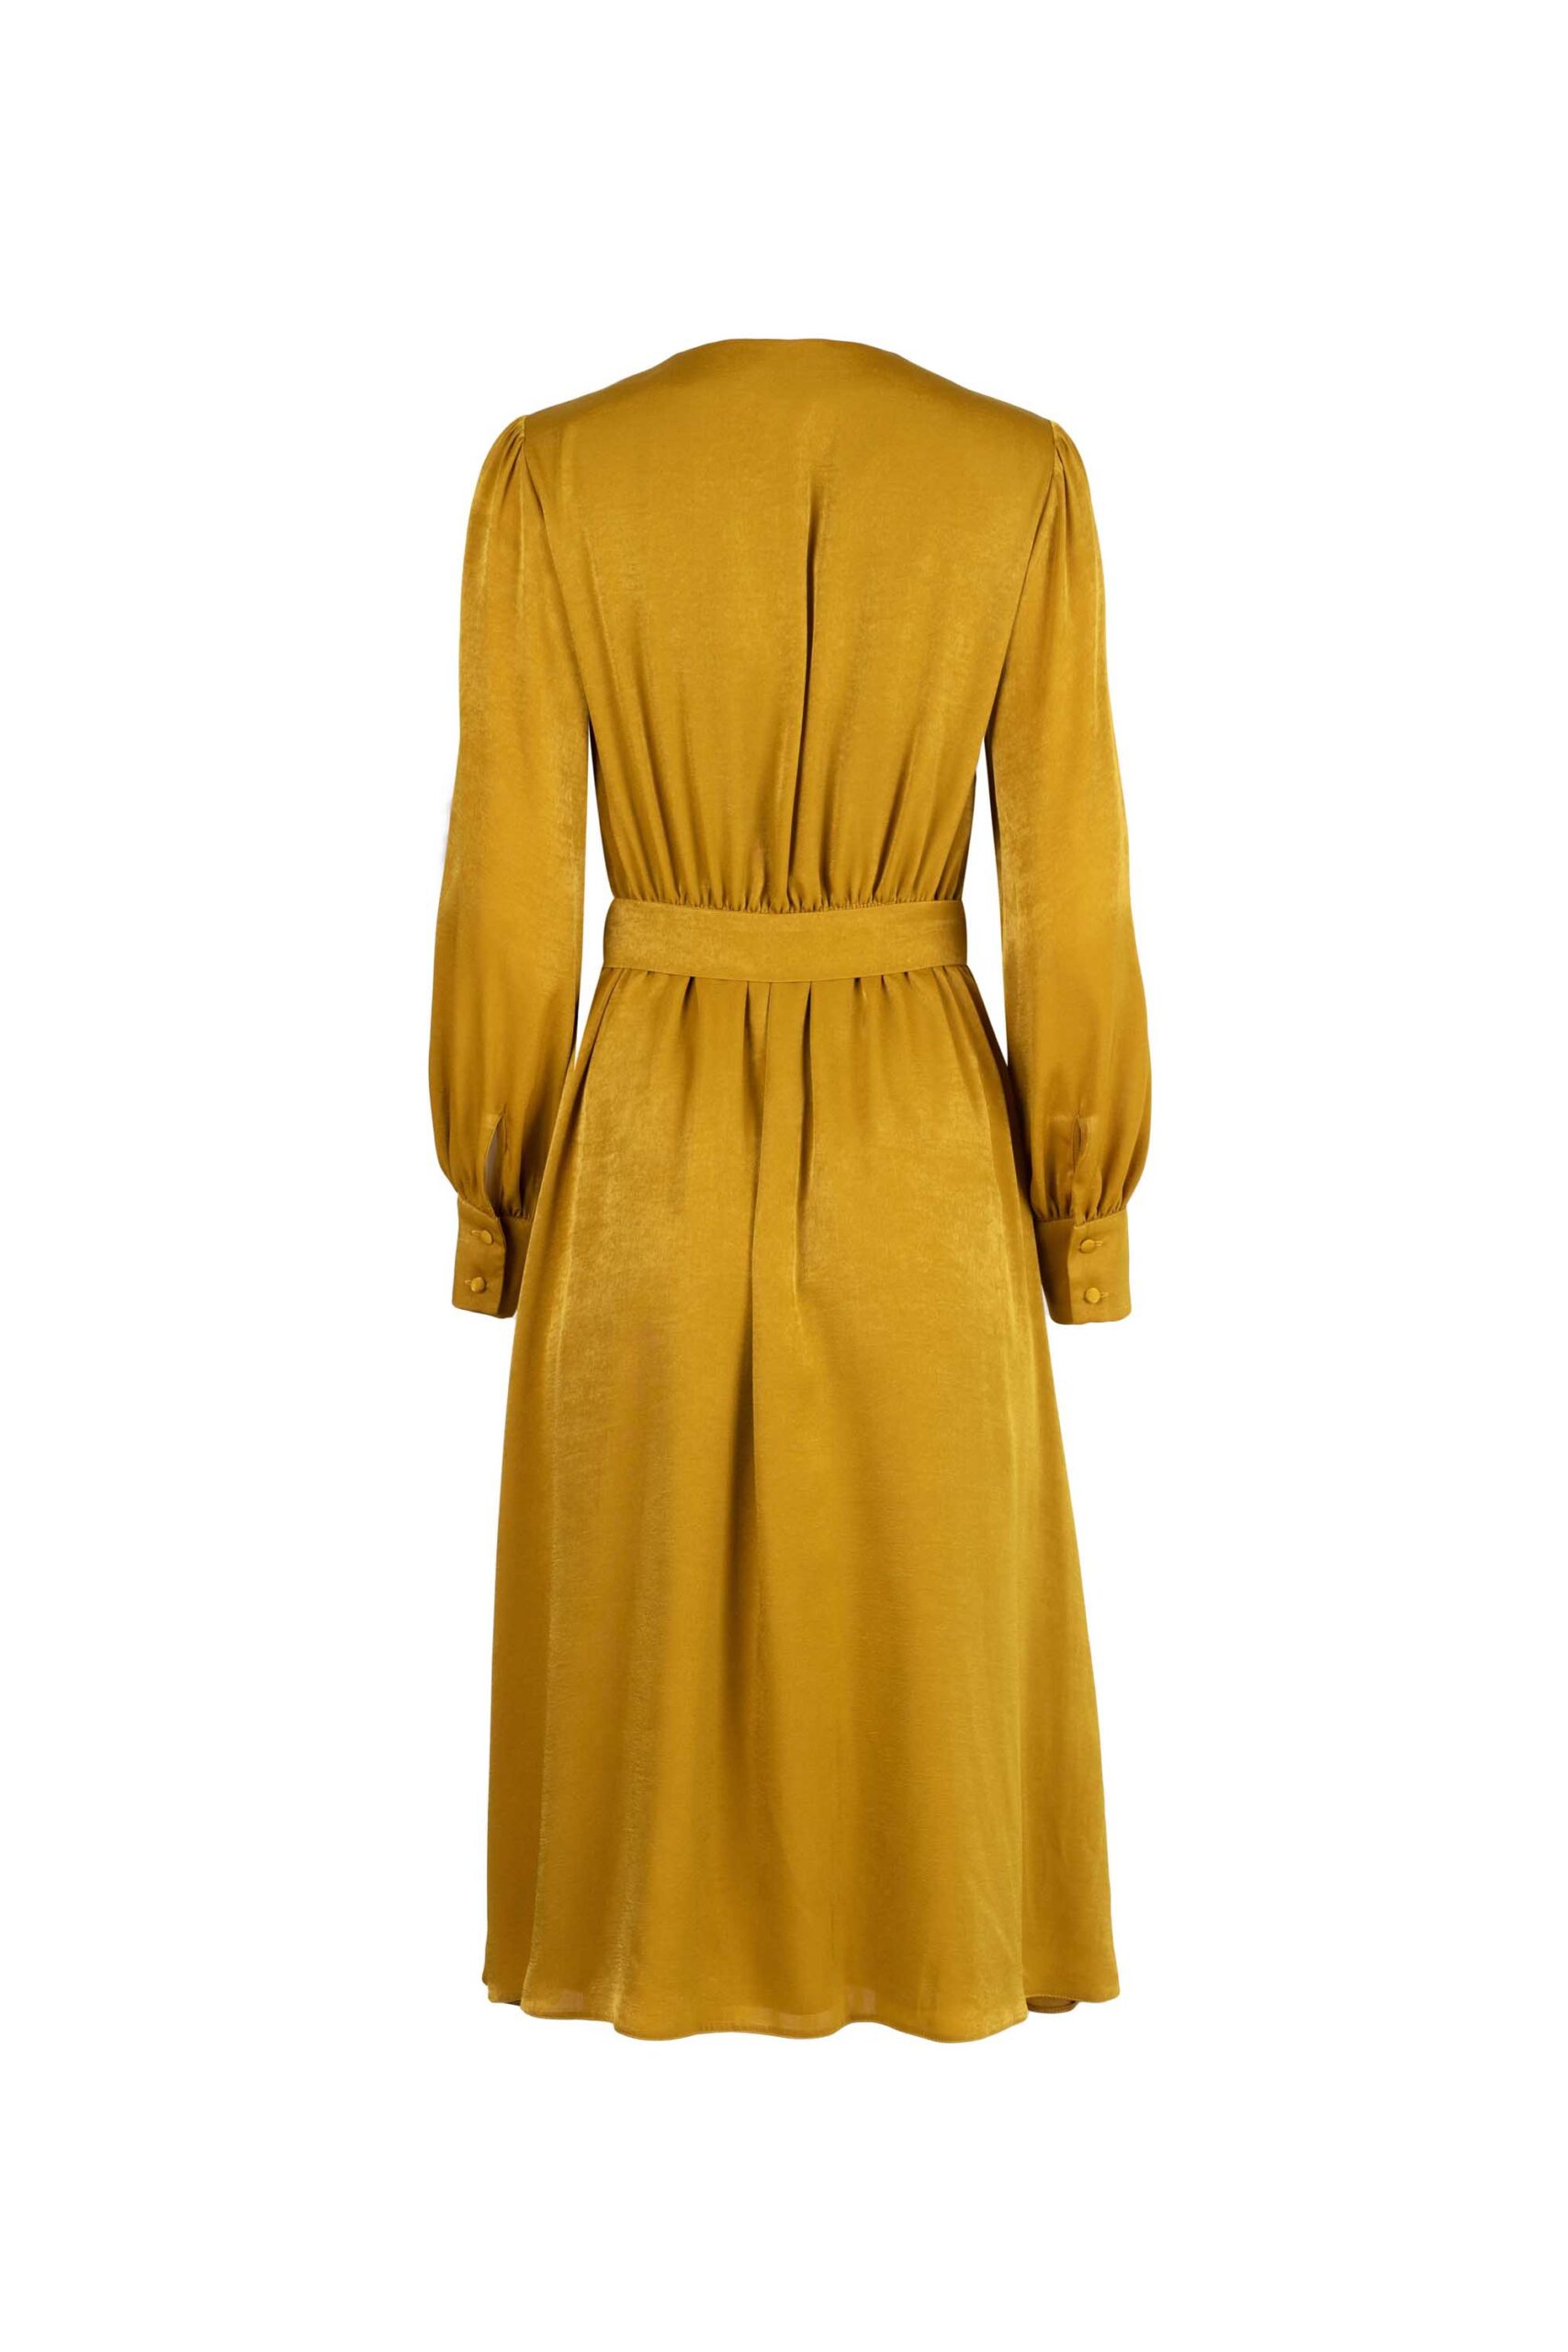 Fit and Flare Sheeny V Neck Dress with Puffed Sleeves and Tie Belt